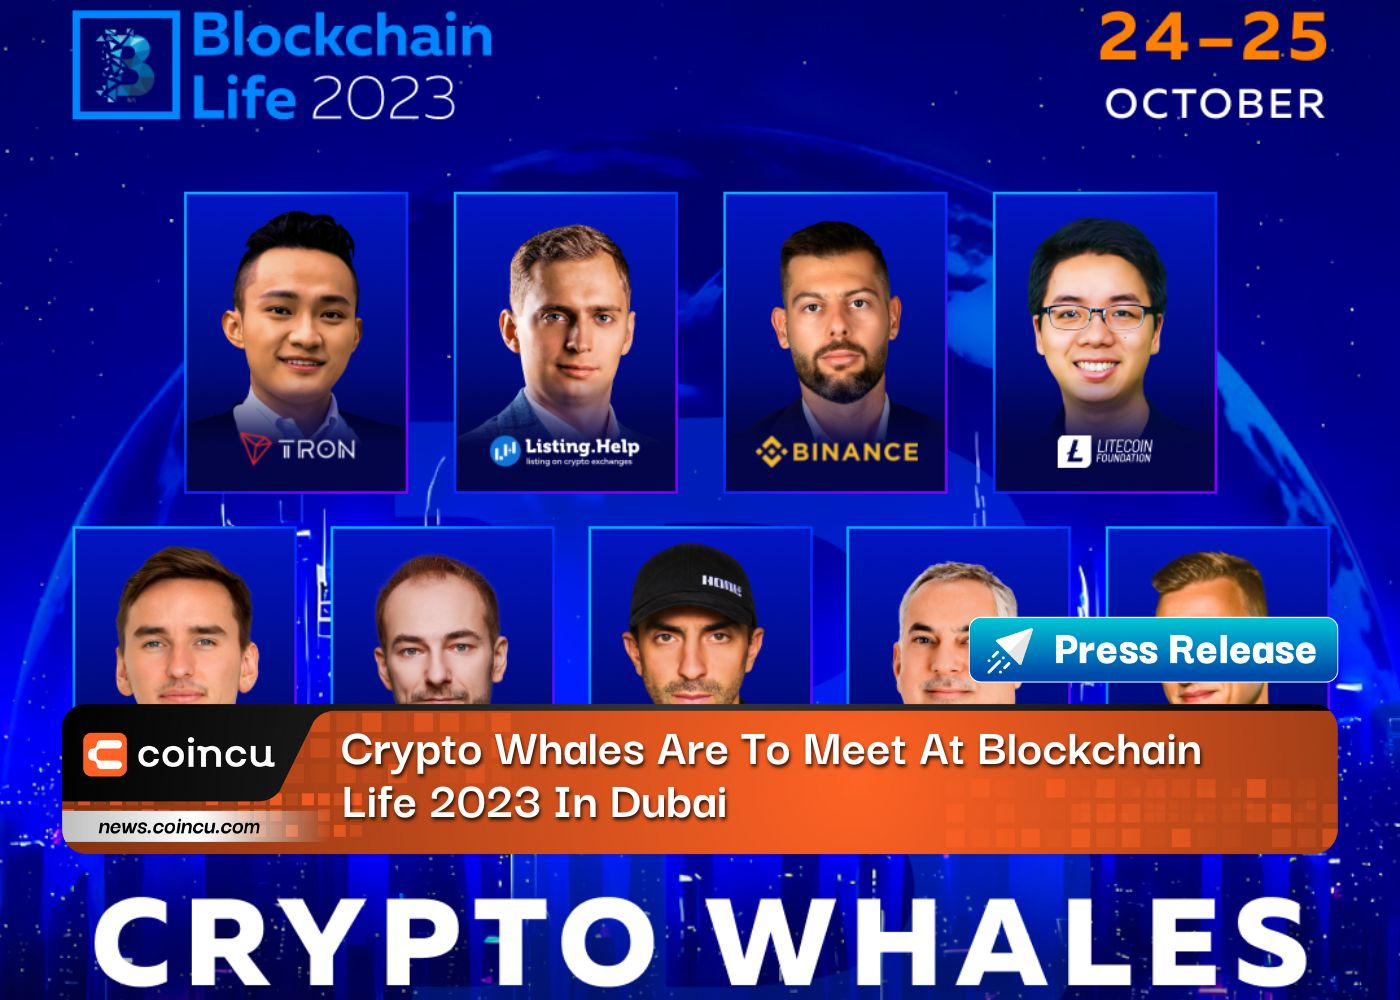 Crypto Whales Are To Meet At Blockchain Life 2023 In Dubai